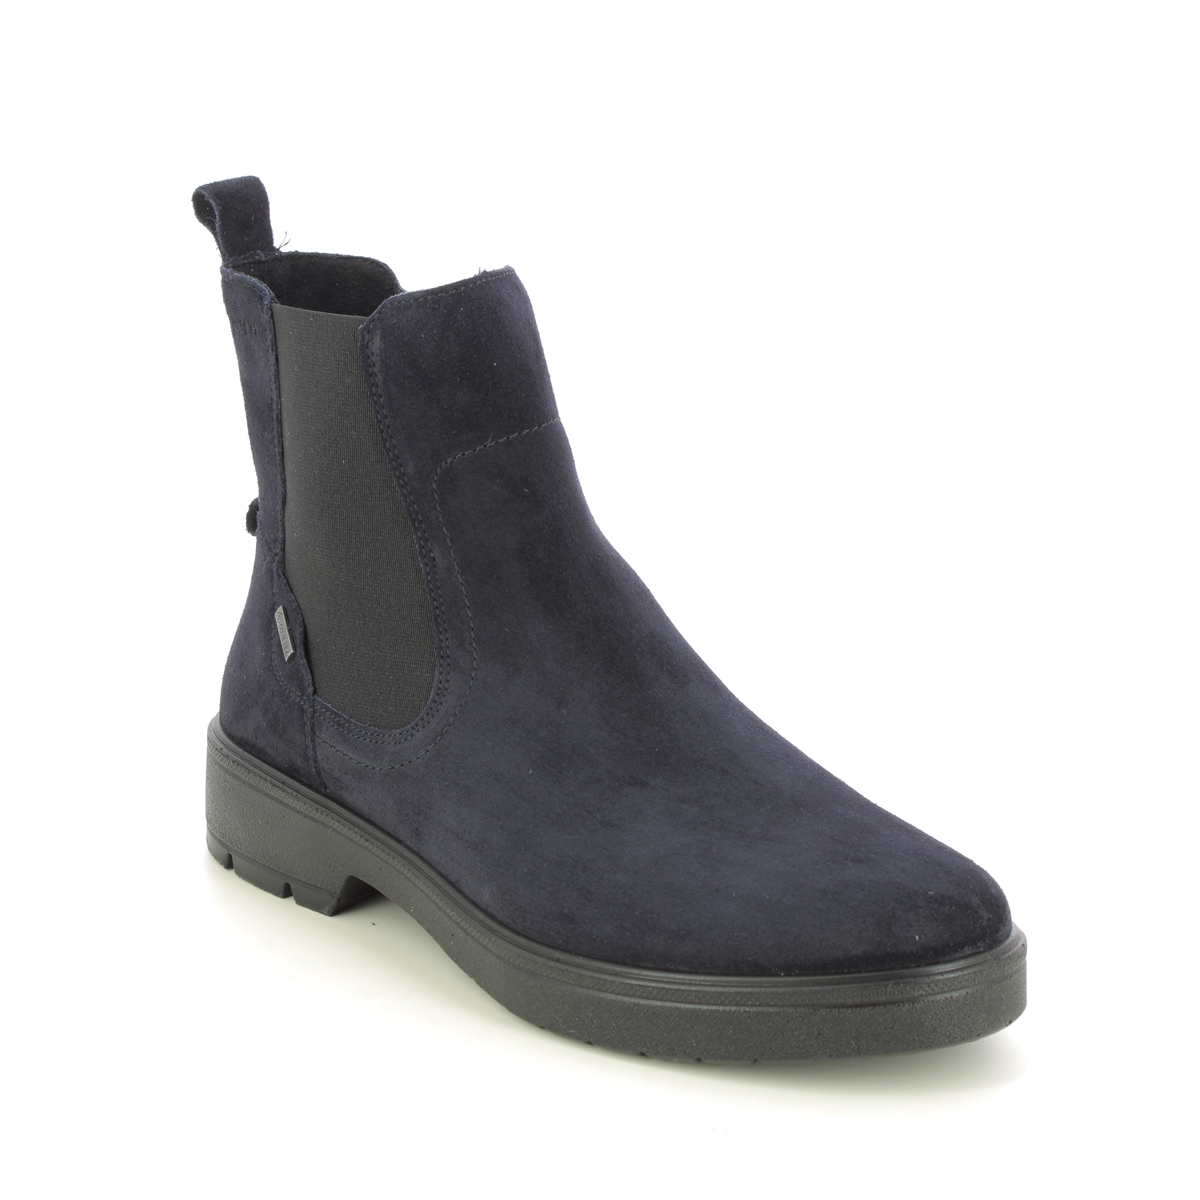 Legero Mystic Chelsea Gtx Navy Suede Womens Chelsea Boots 2000191-8000 In Size 5 In Plain Navy Suede